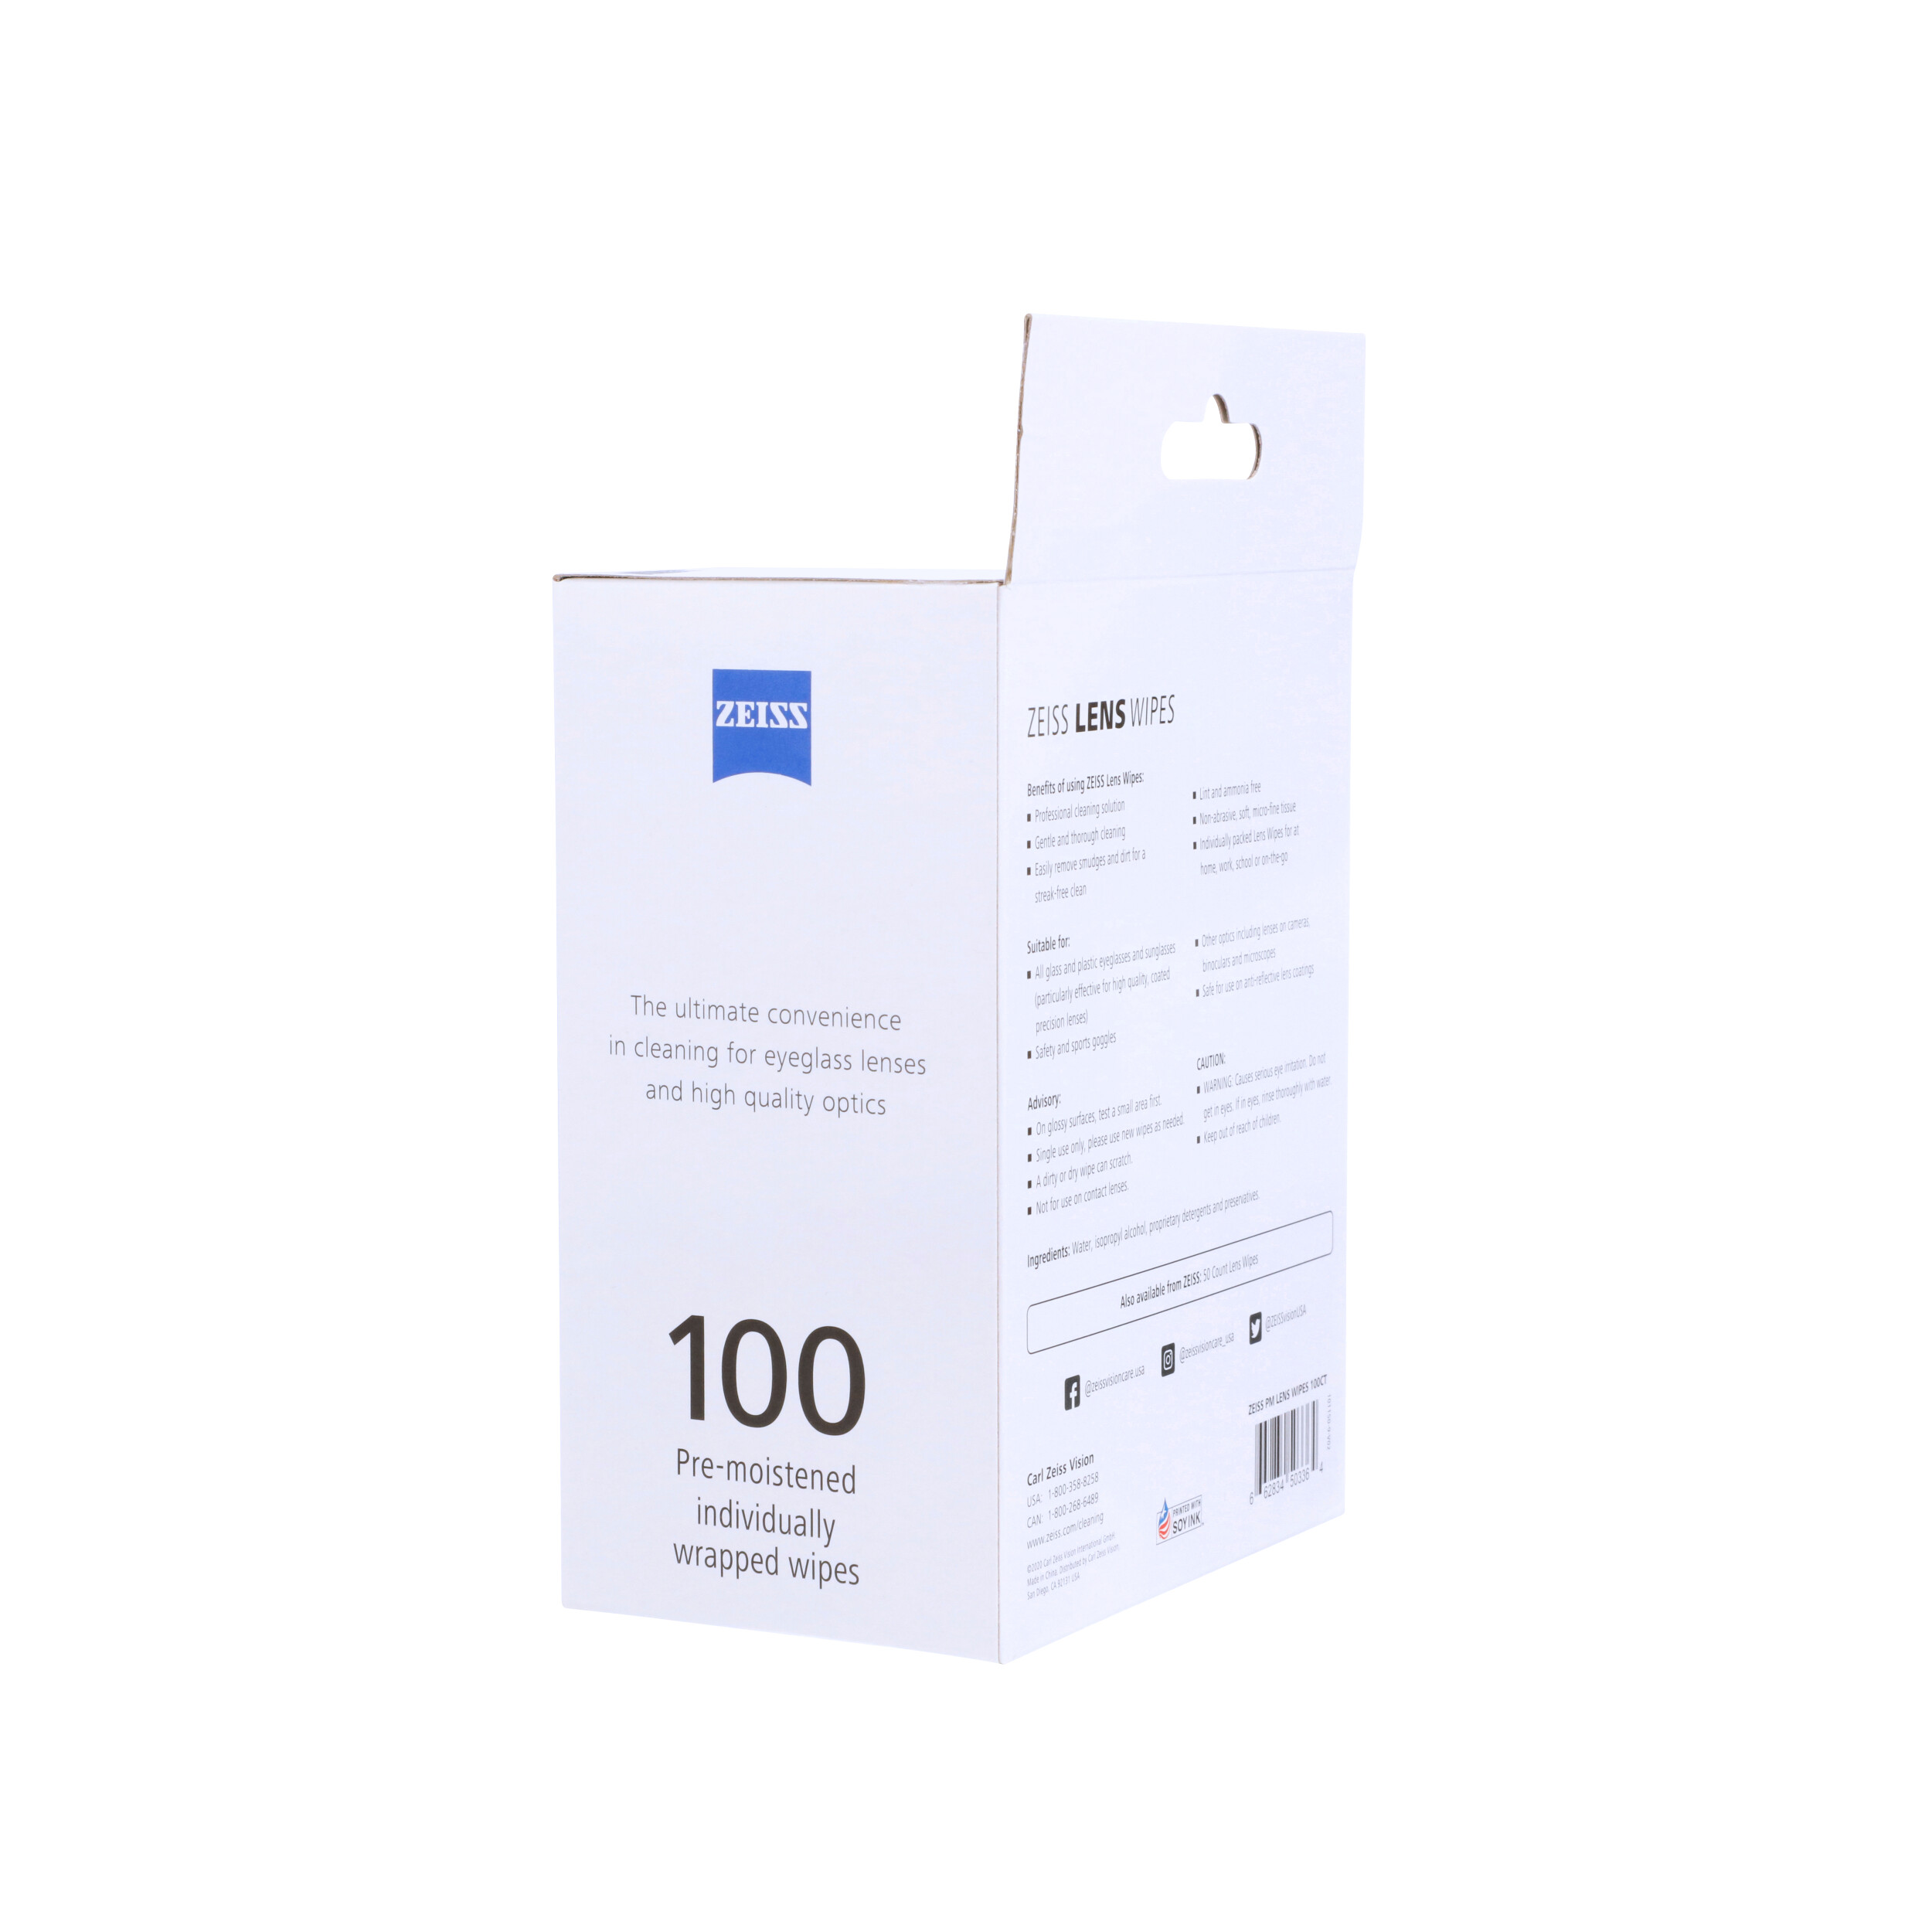 ZEISS Lens Wipes, Pre-Moistened Eye Glass Cleaner Wipes, 100 Count